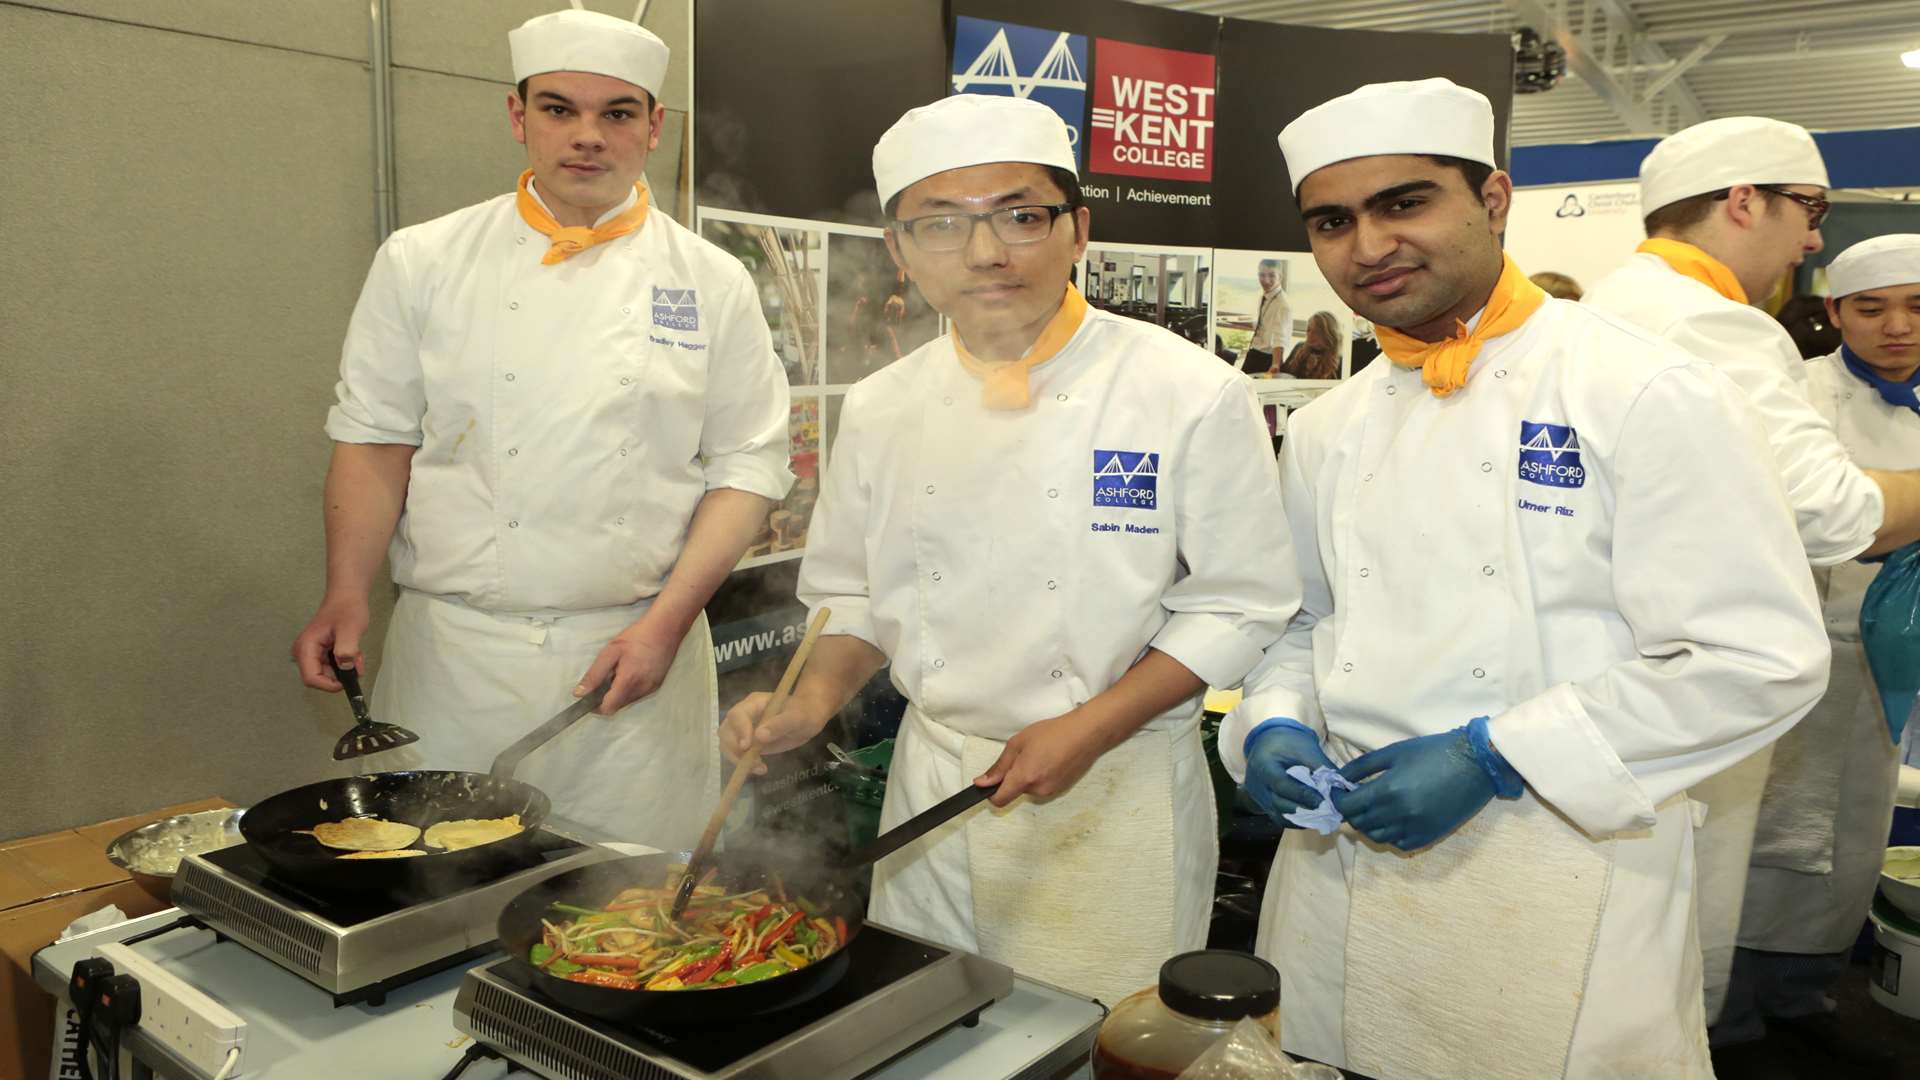 From left, Bradley Hagger, Sabin Maden and Umer Rlaz cook on the Ashford College stand